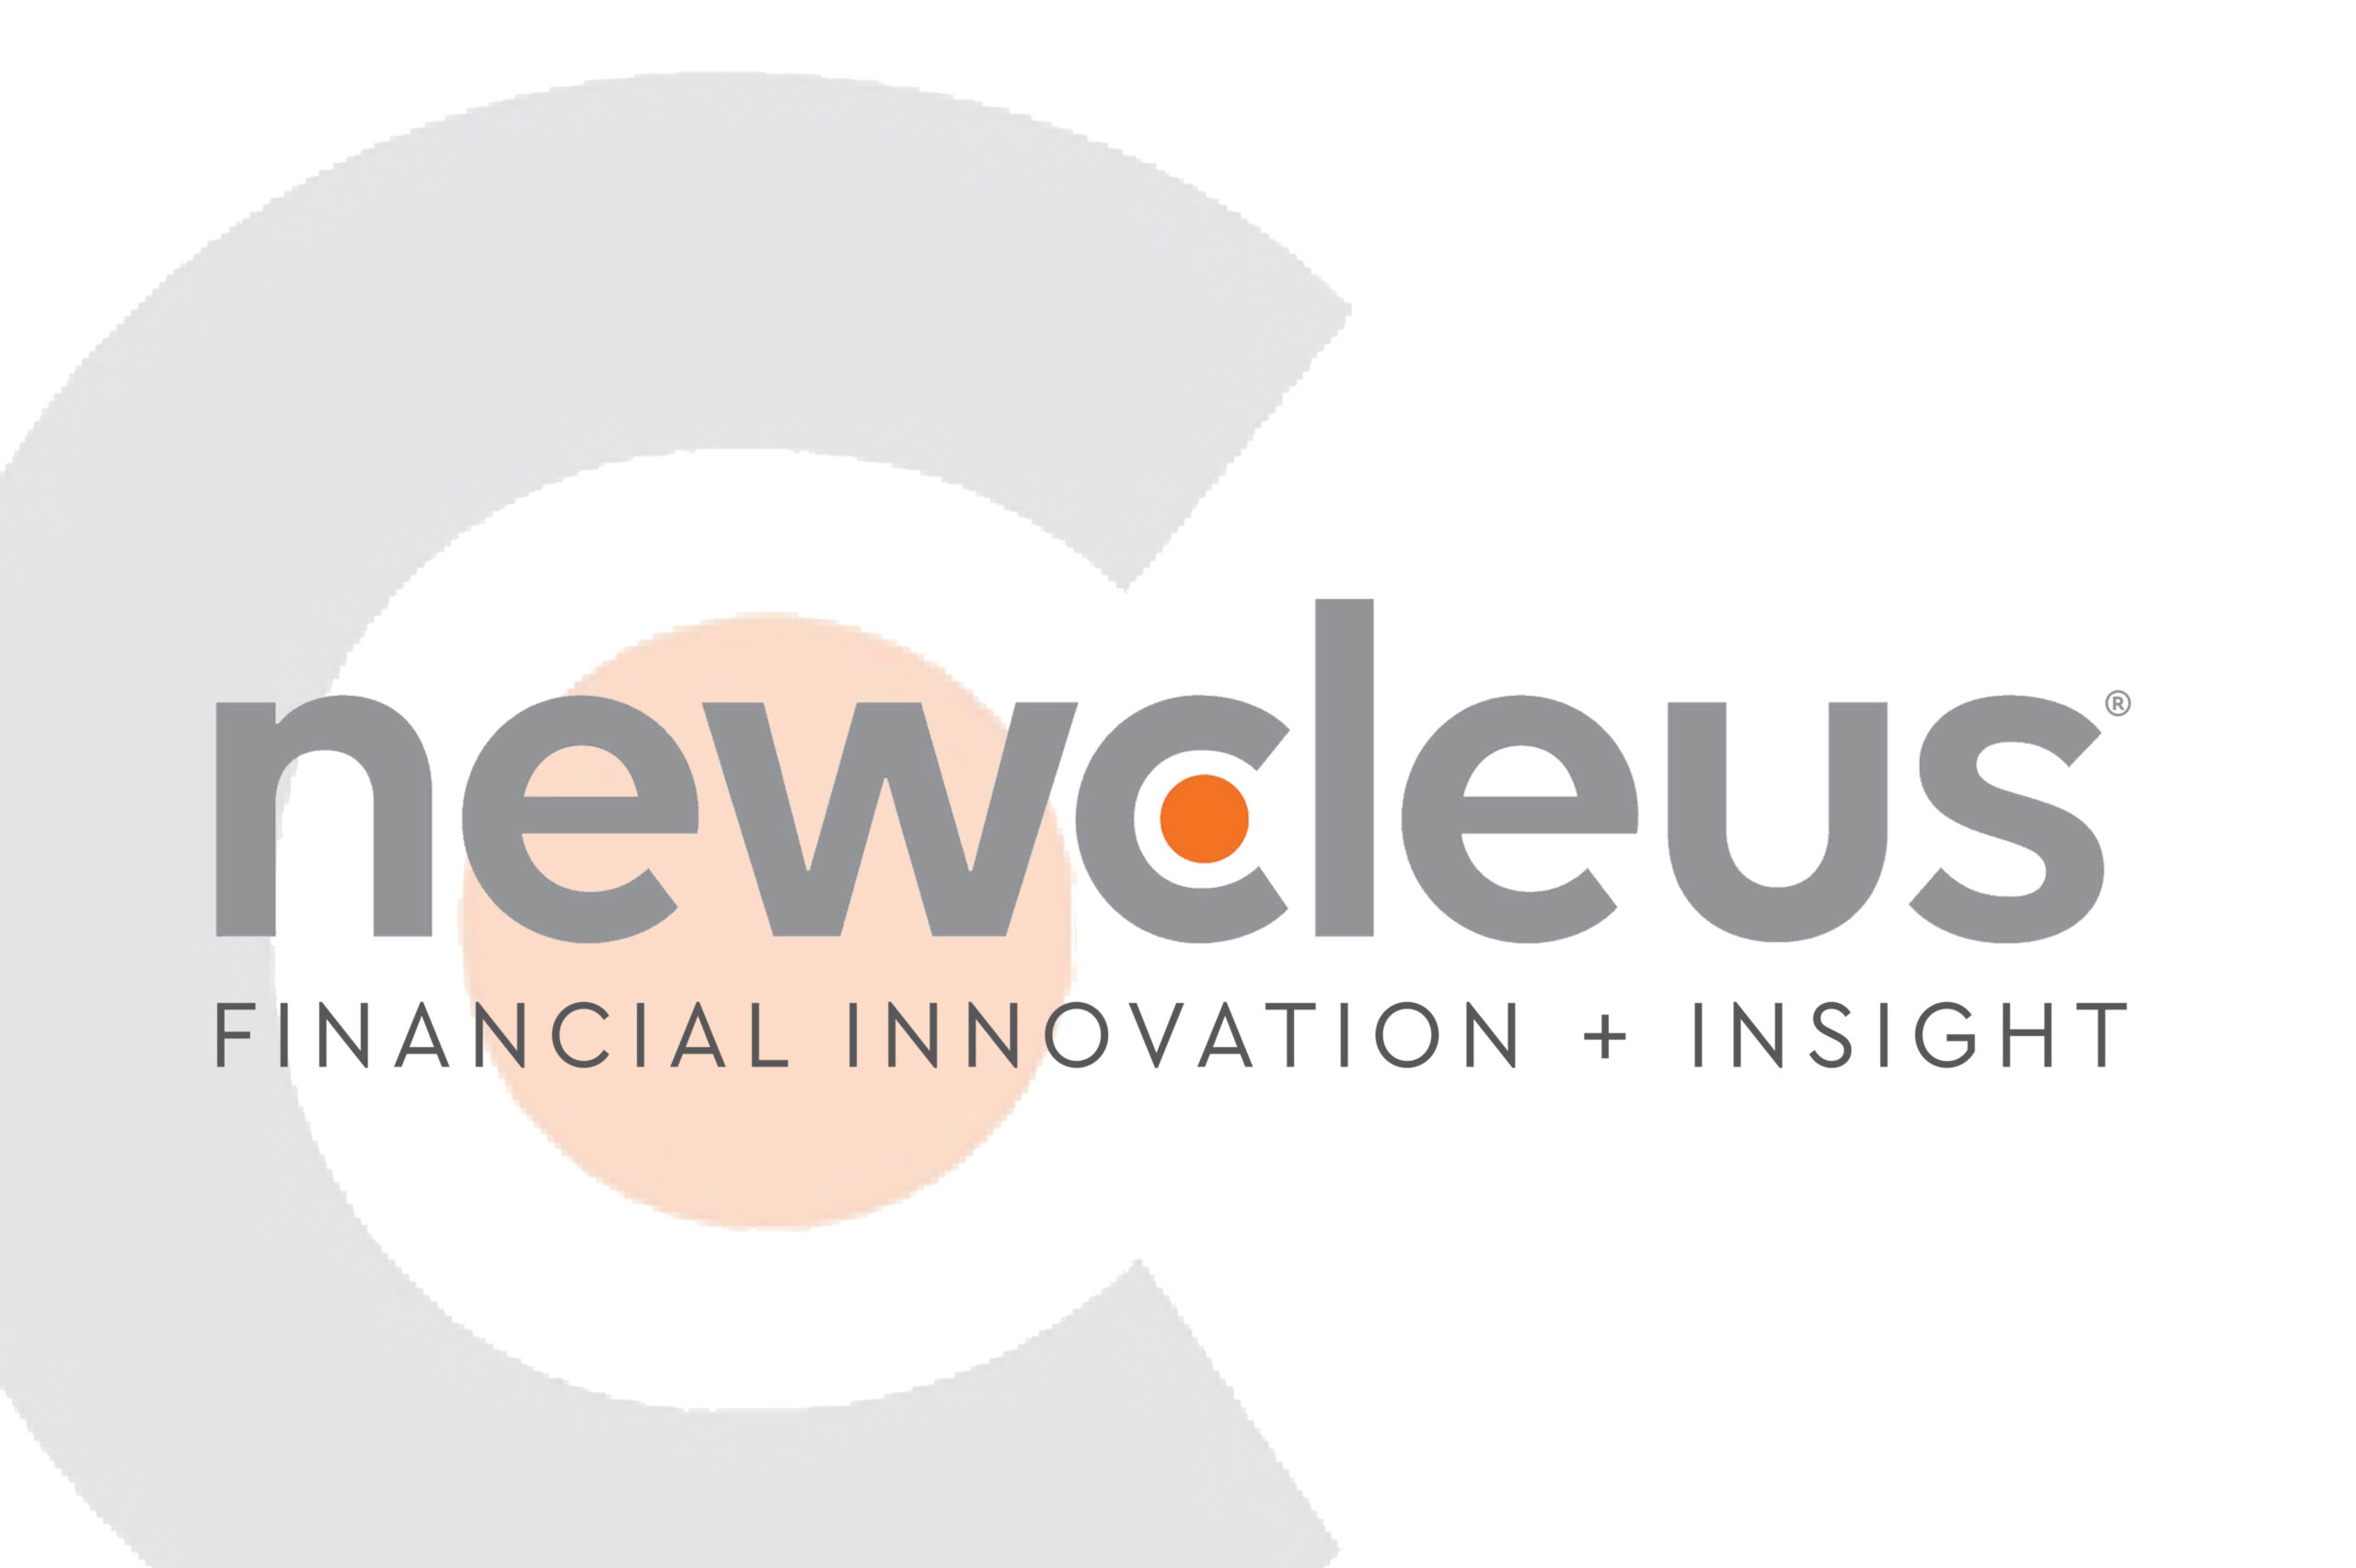 Newcleus Completes its Combination and Rebranding Strategies